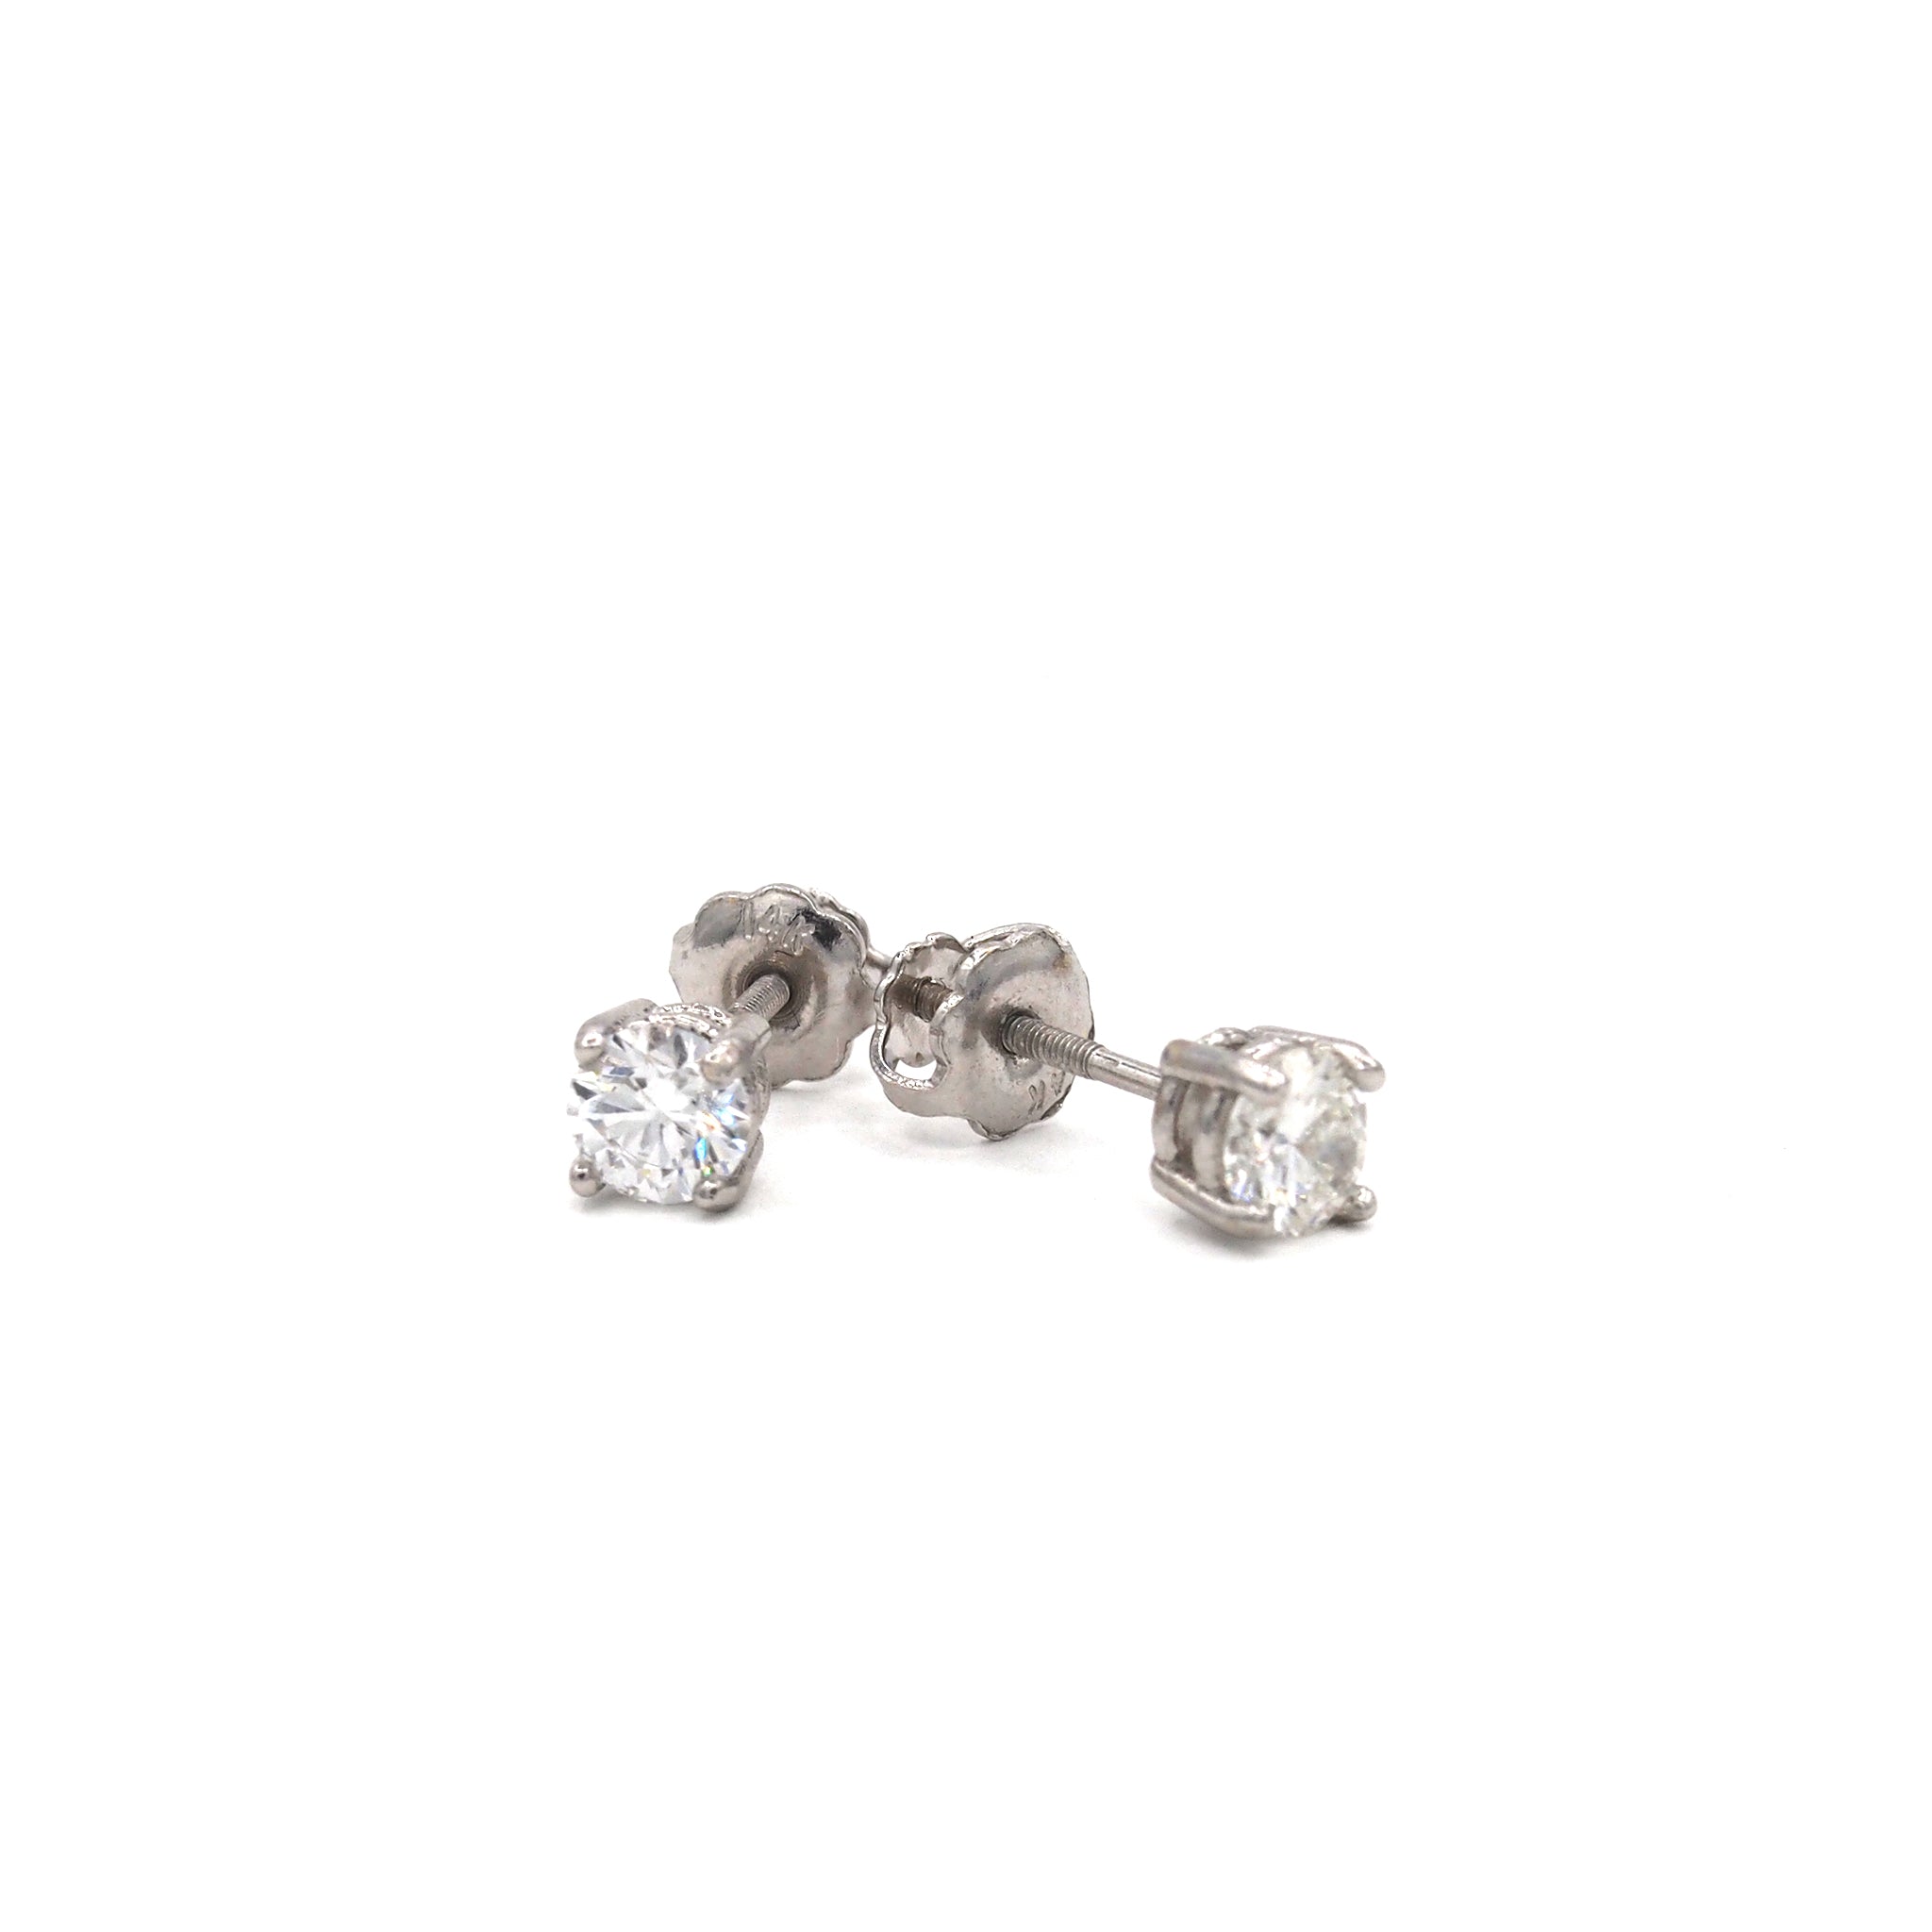 Beautiful 0.50 ct lab grown diamond earrings set in 14K white gold by Lico Jewelry, Montreal.